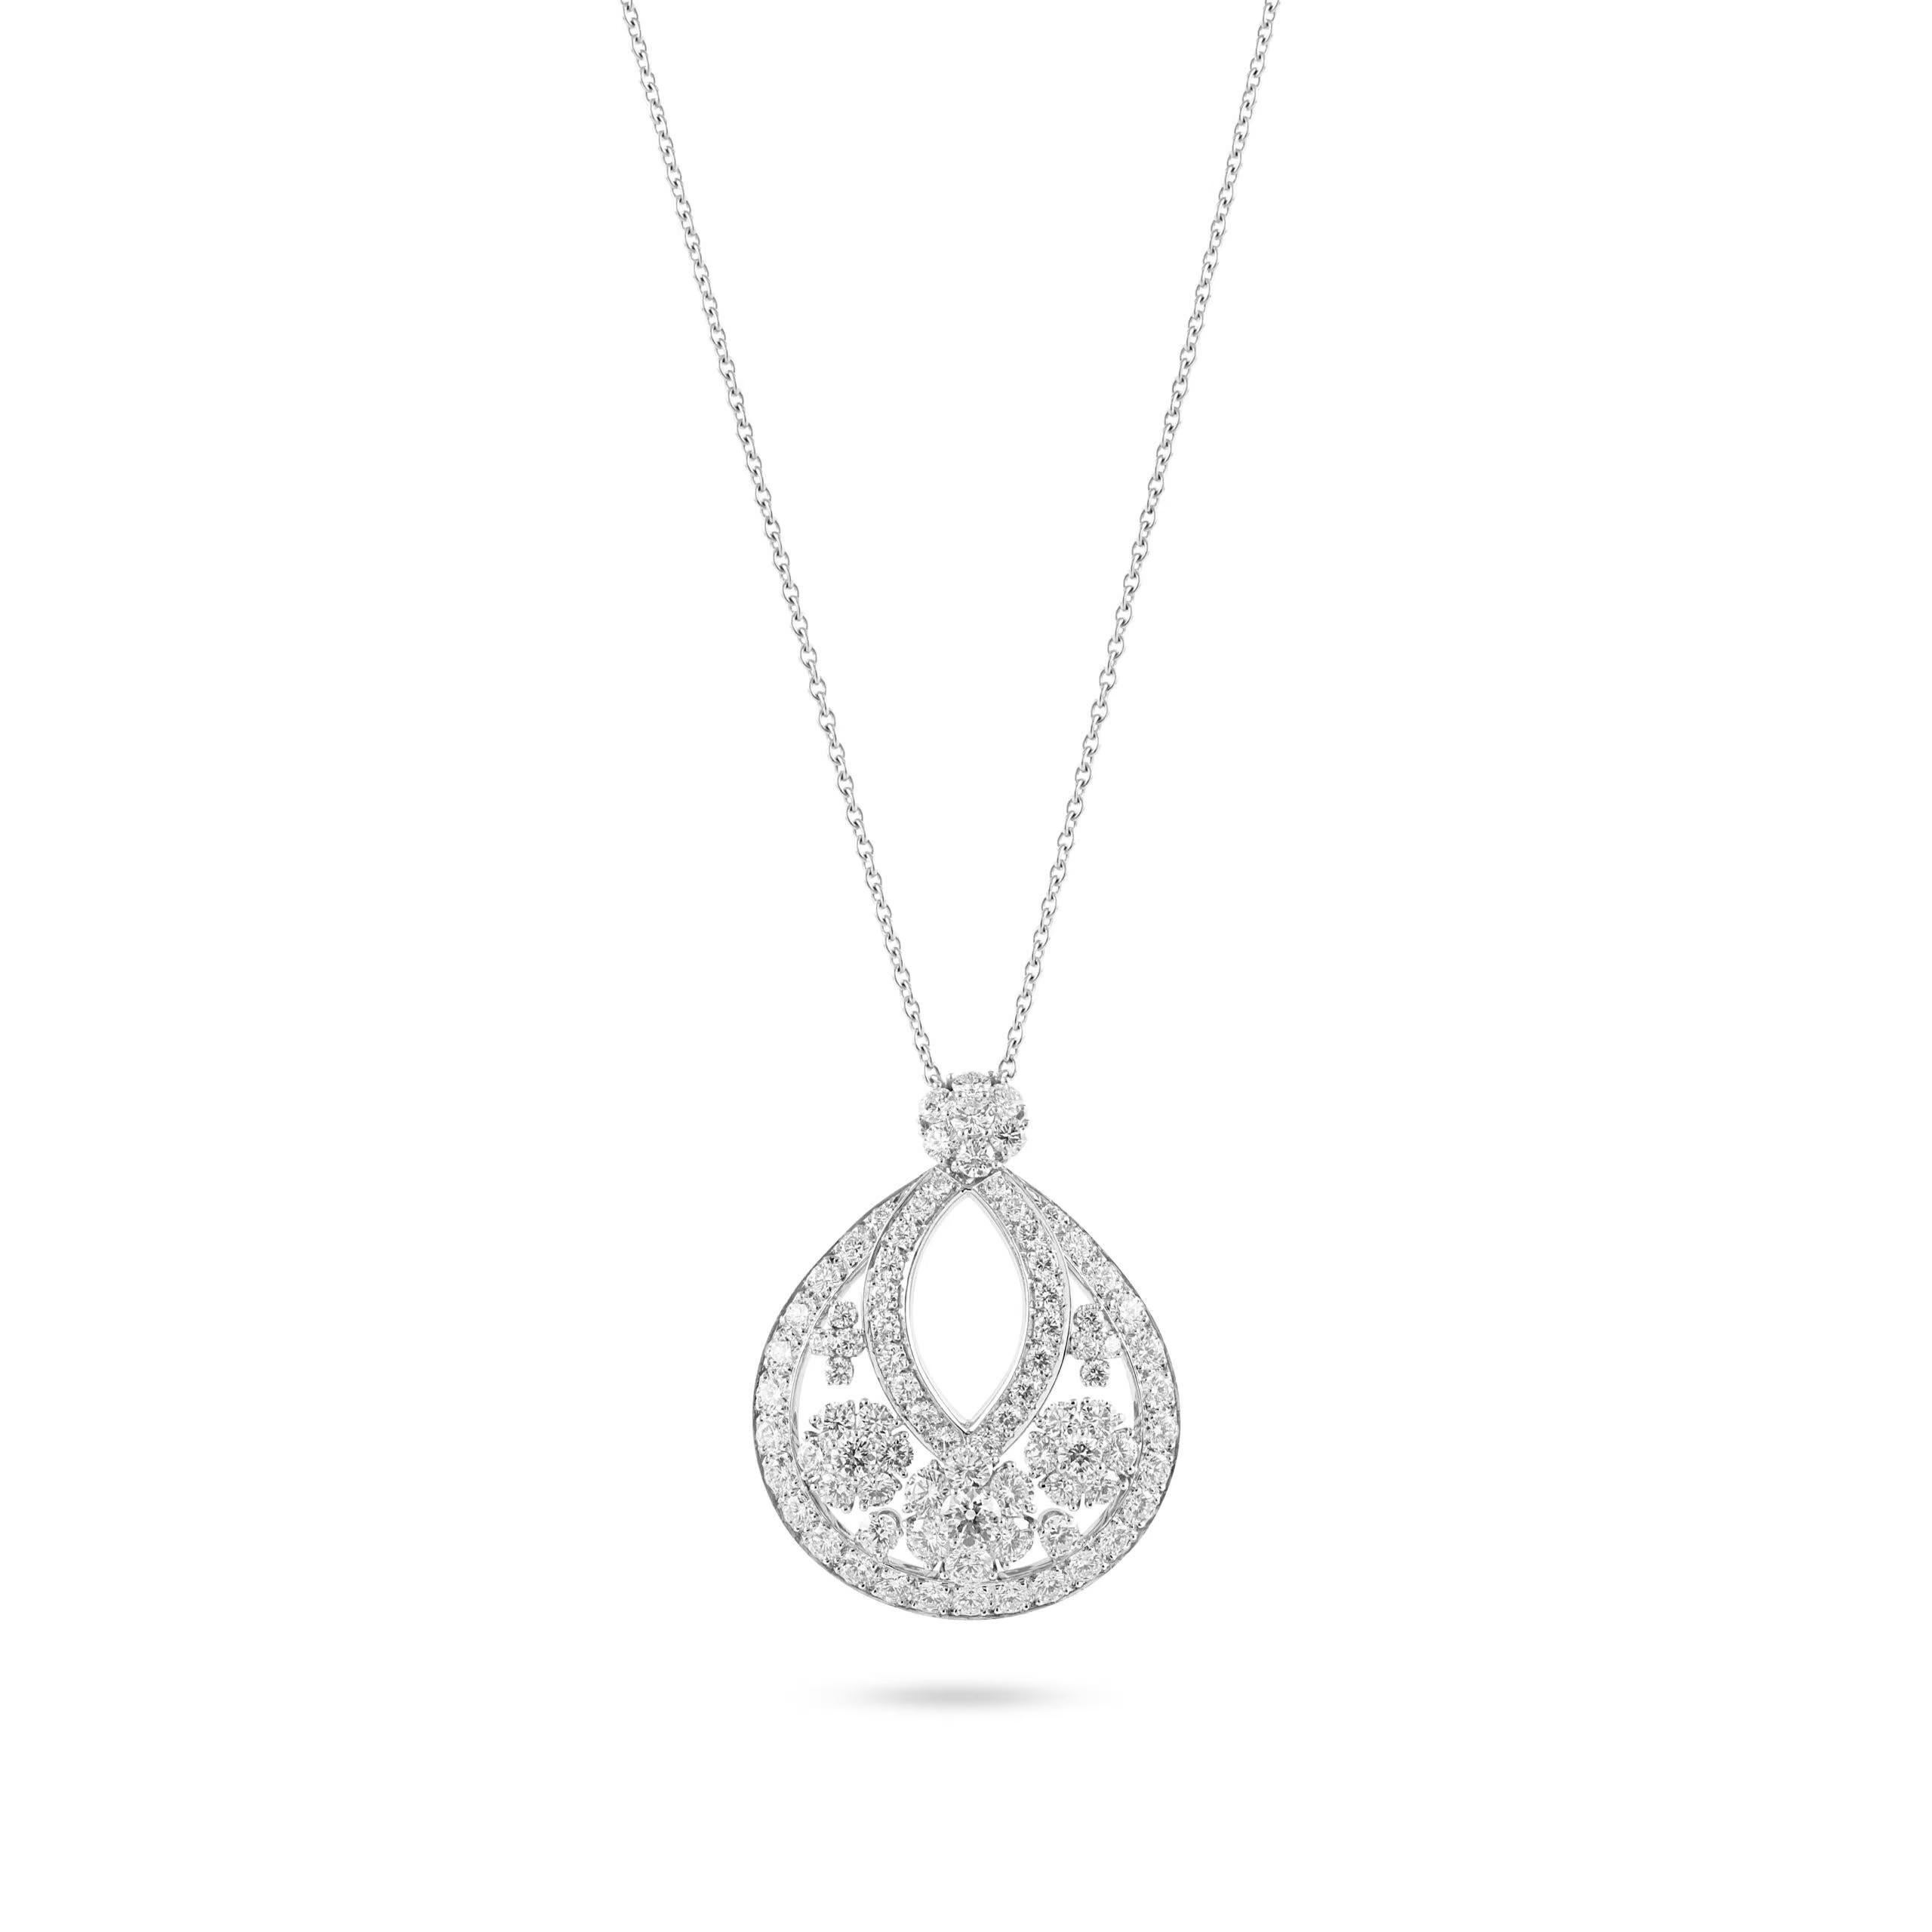 Sparkling with light, the Snowflake High Jewelry collection is inspired by flakes of snow - an inspiration for Van Cleef & Arpels since the 1940s. Round diamonds combine to form dazzling winter motifs.

Featured is a Van Cleef & Arpels Diamond